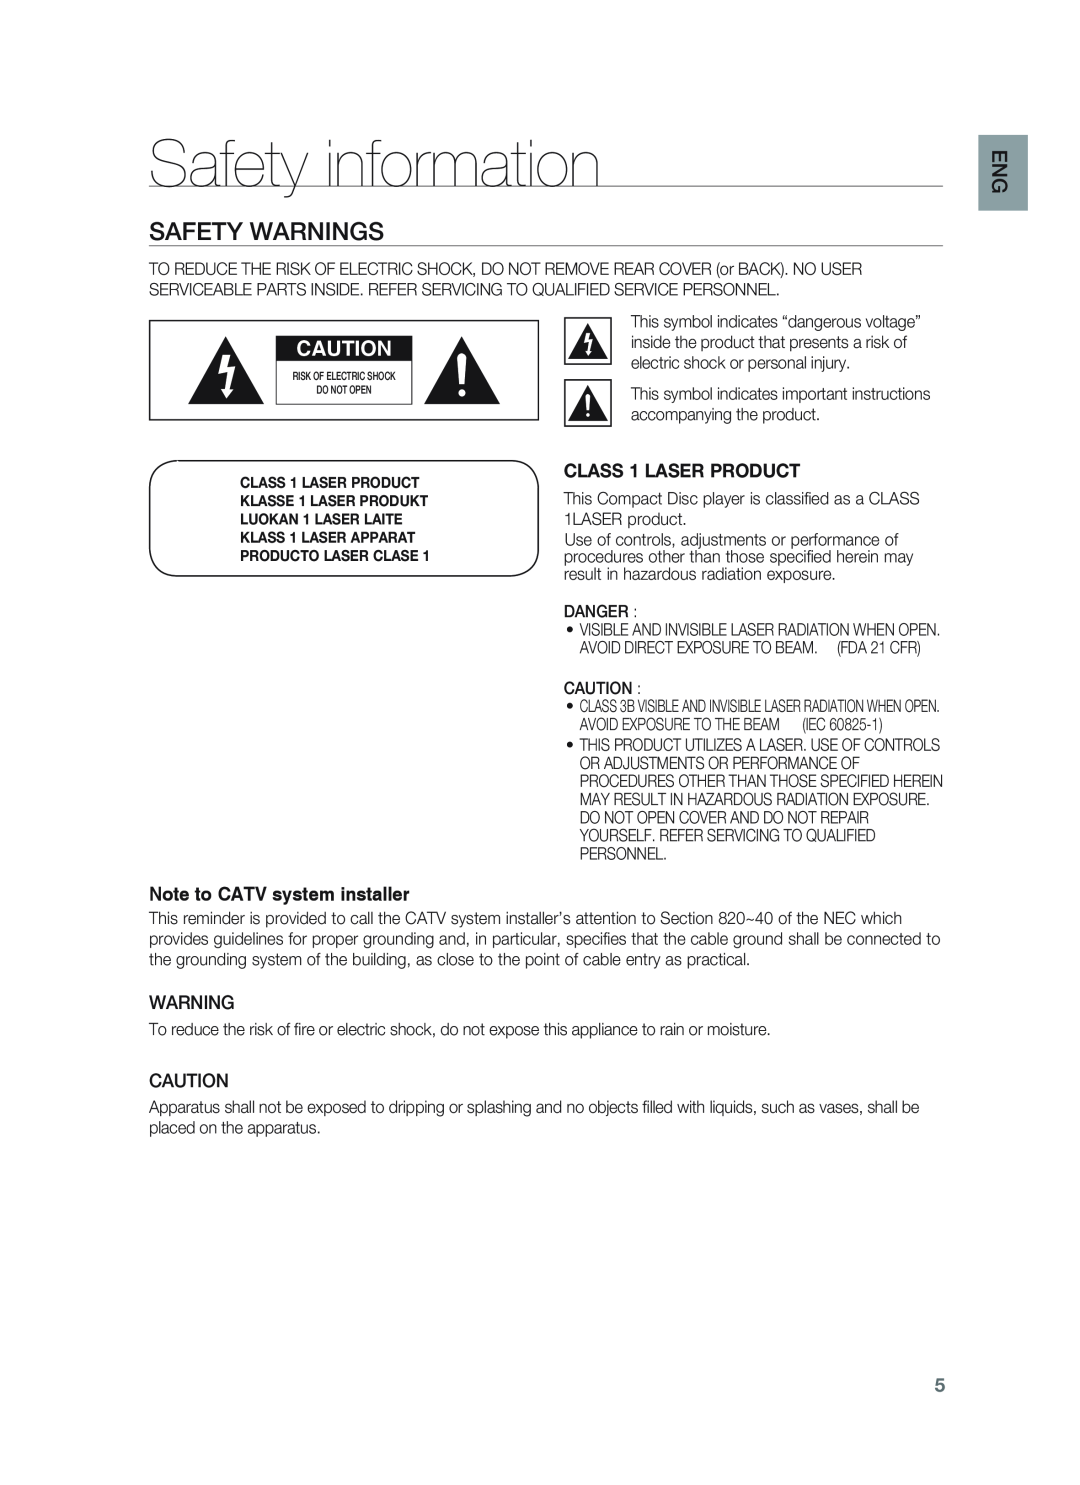 Samsung HT-BD1252, HT-BD1255 Safety information, Safety Warnings, Note to CATV system installer, CLASS 1 LASER PRODUCT 